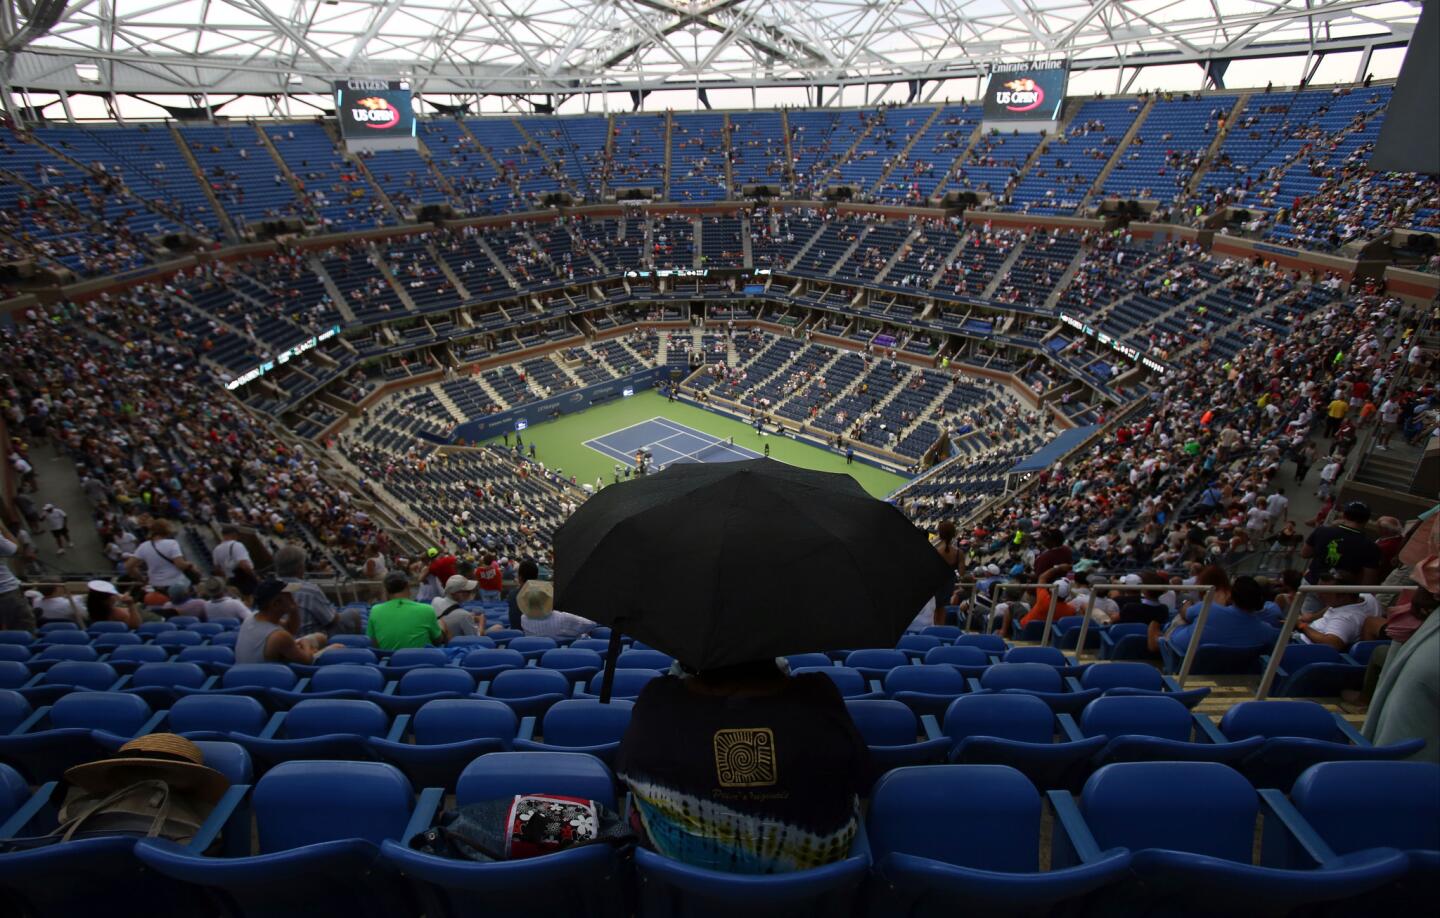 A spectator holds an umbrella during a rain delay in the quarterfinal match between Victoria Azarenka, of Belarus, and Simona Halep, of Romania, at the U.S. Open tennis tournament, Wednesday, Sept. 9, 2015, in New York. (AP Photo/Adam Hunger)